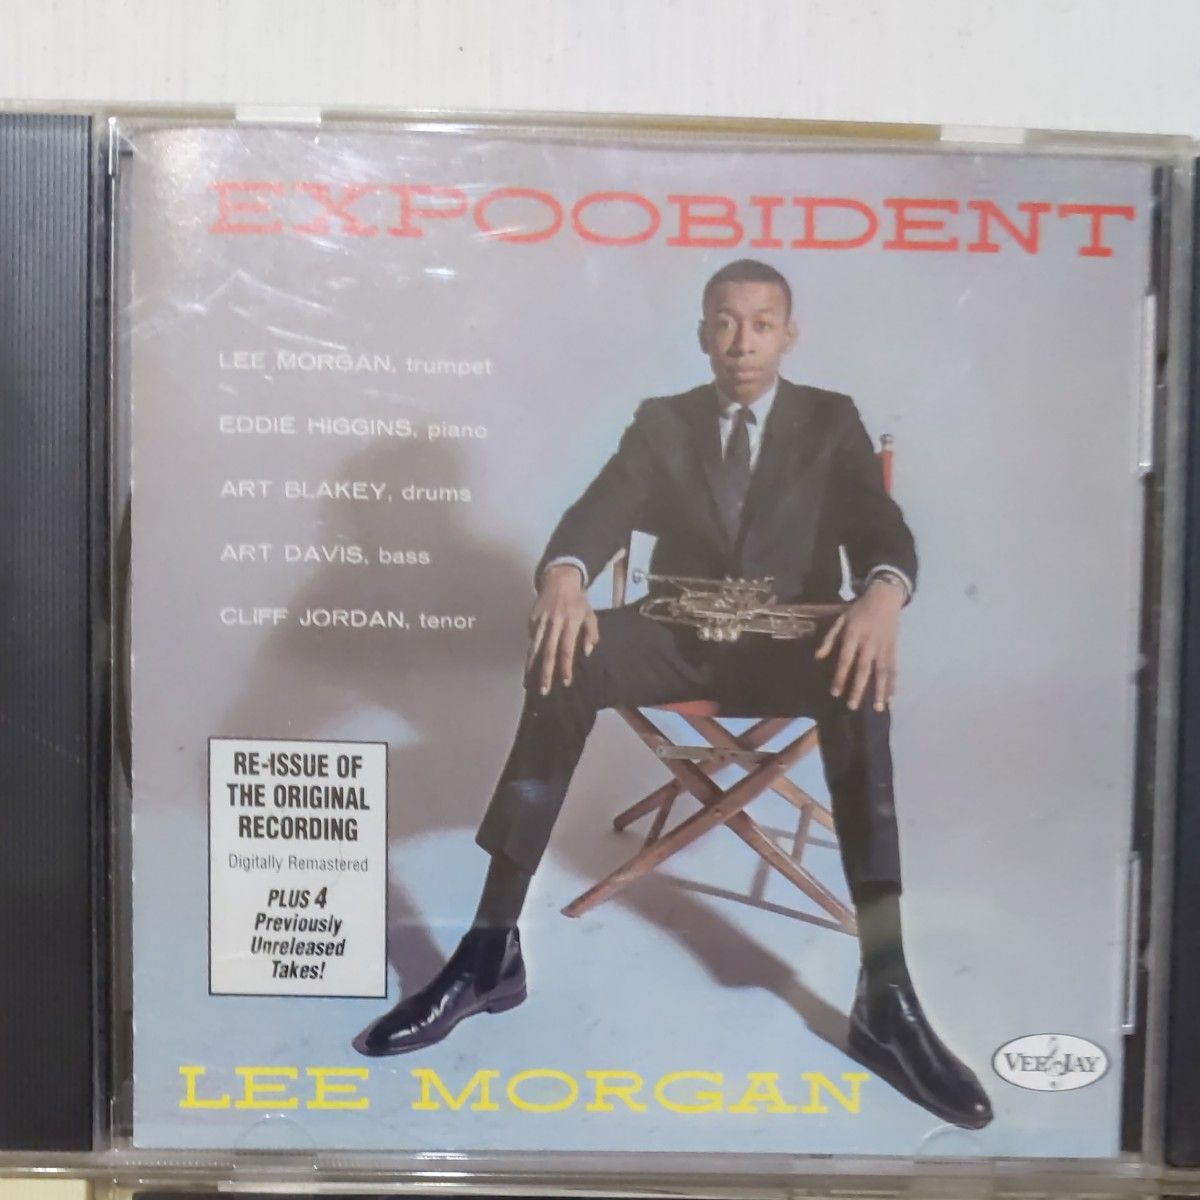 here's LEE MORGAN リーモーガン expoobident, introducing, candy CD 4枚セット